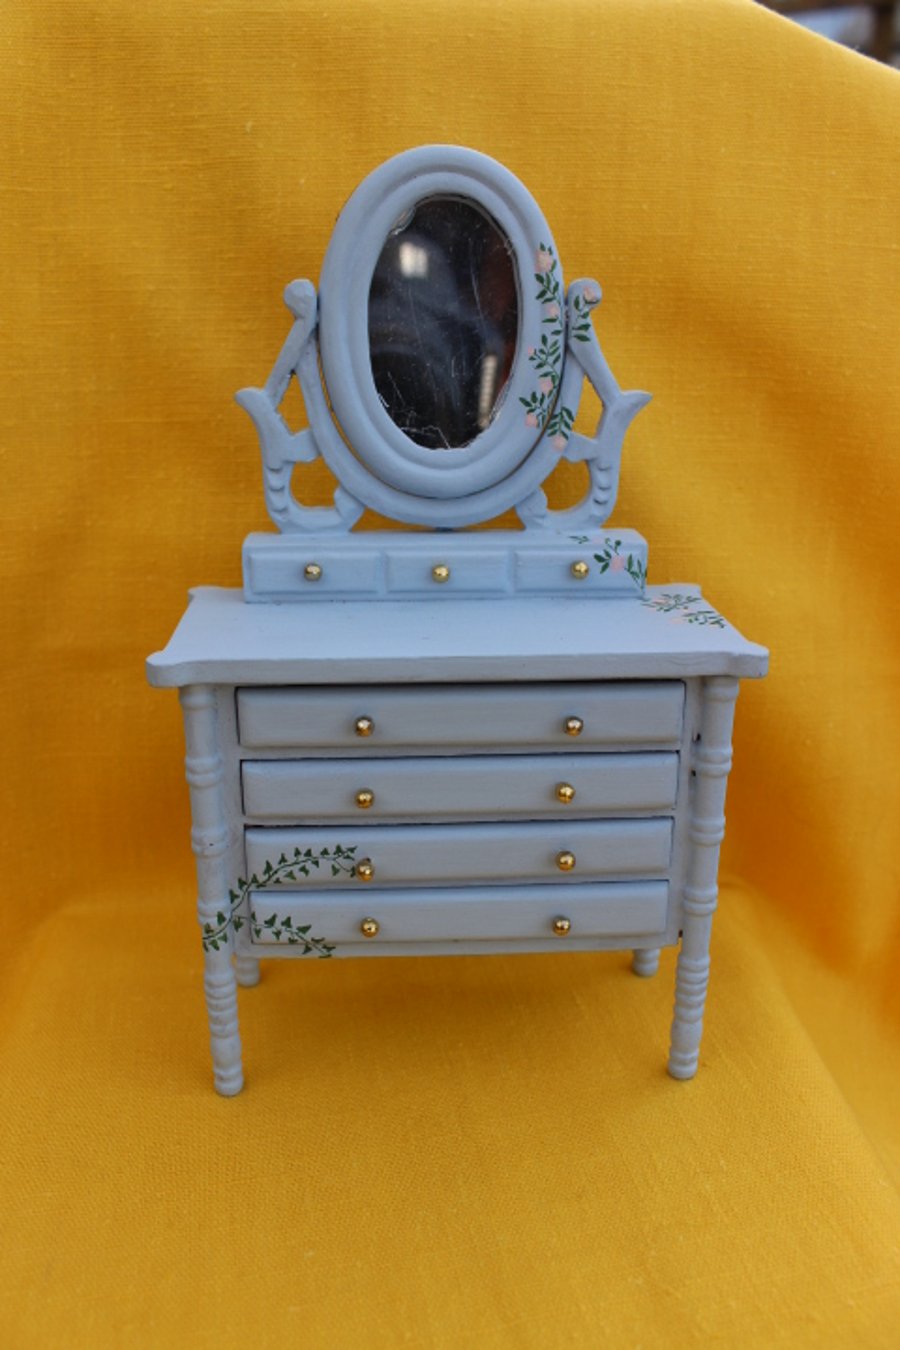 12th scale Dressing table